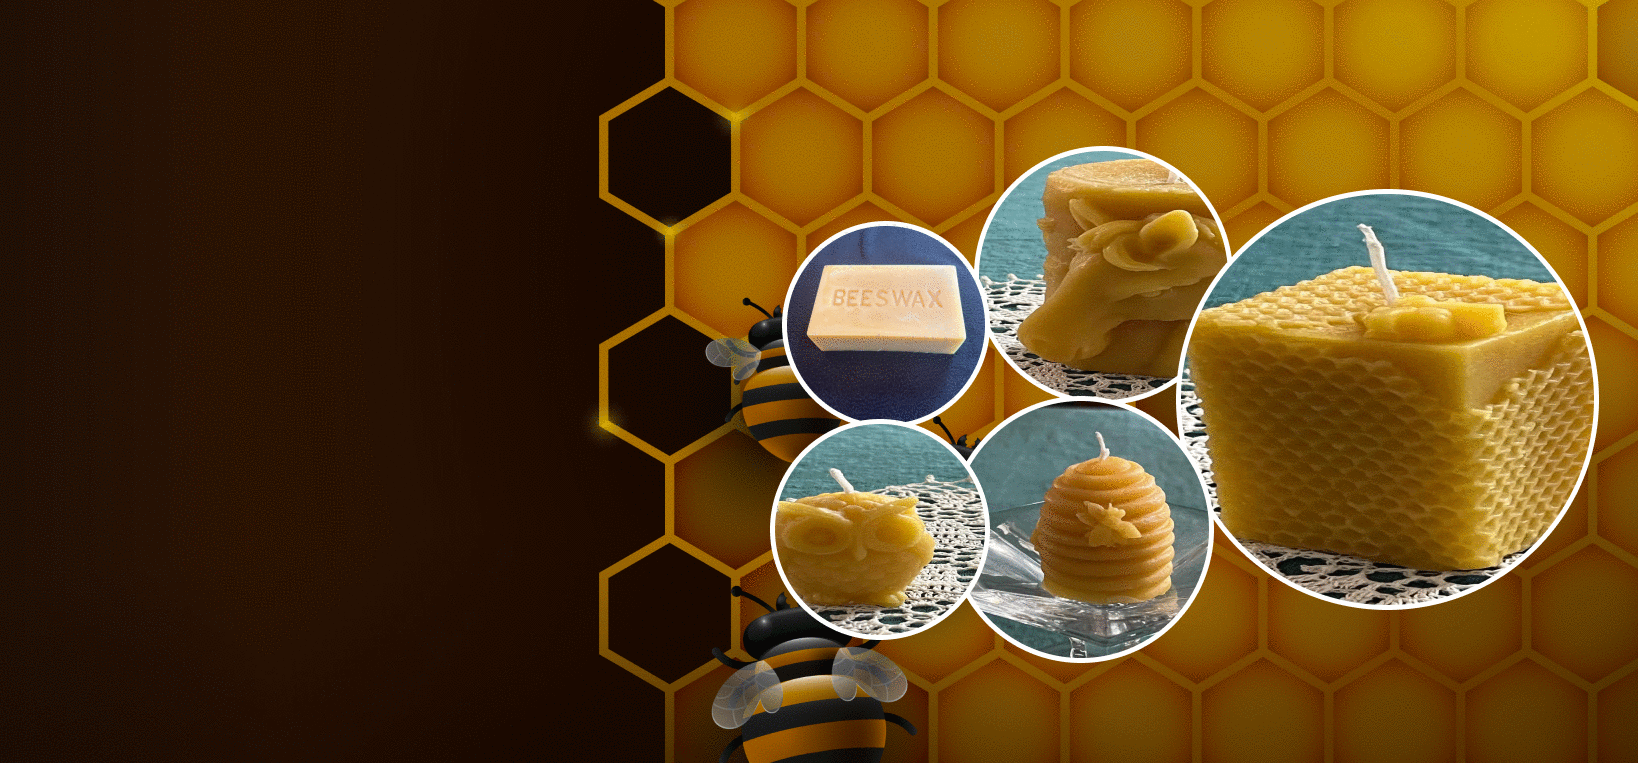 Natural Beeswax Products